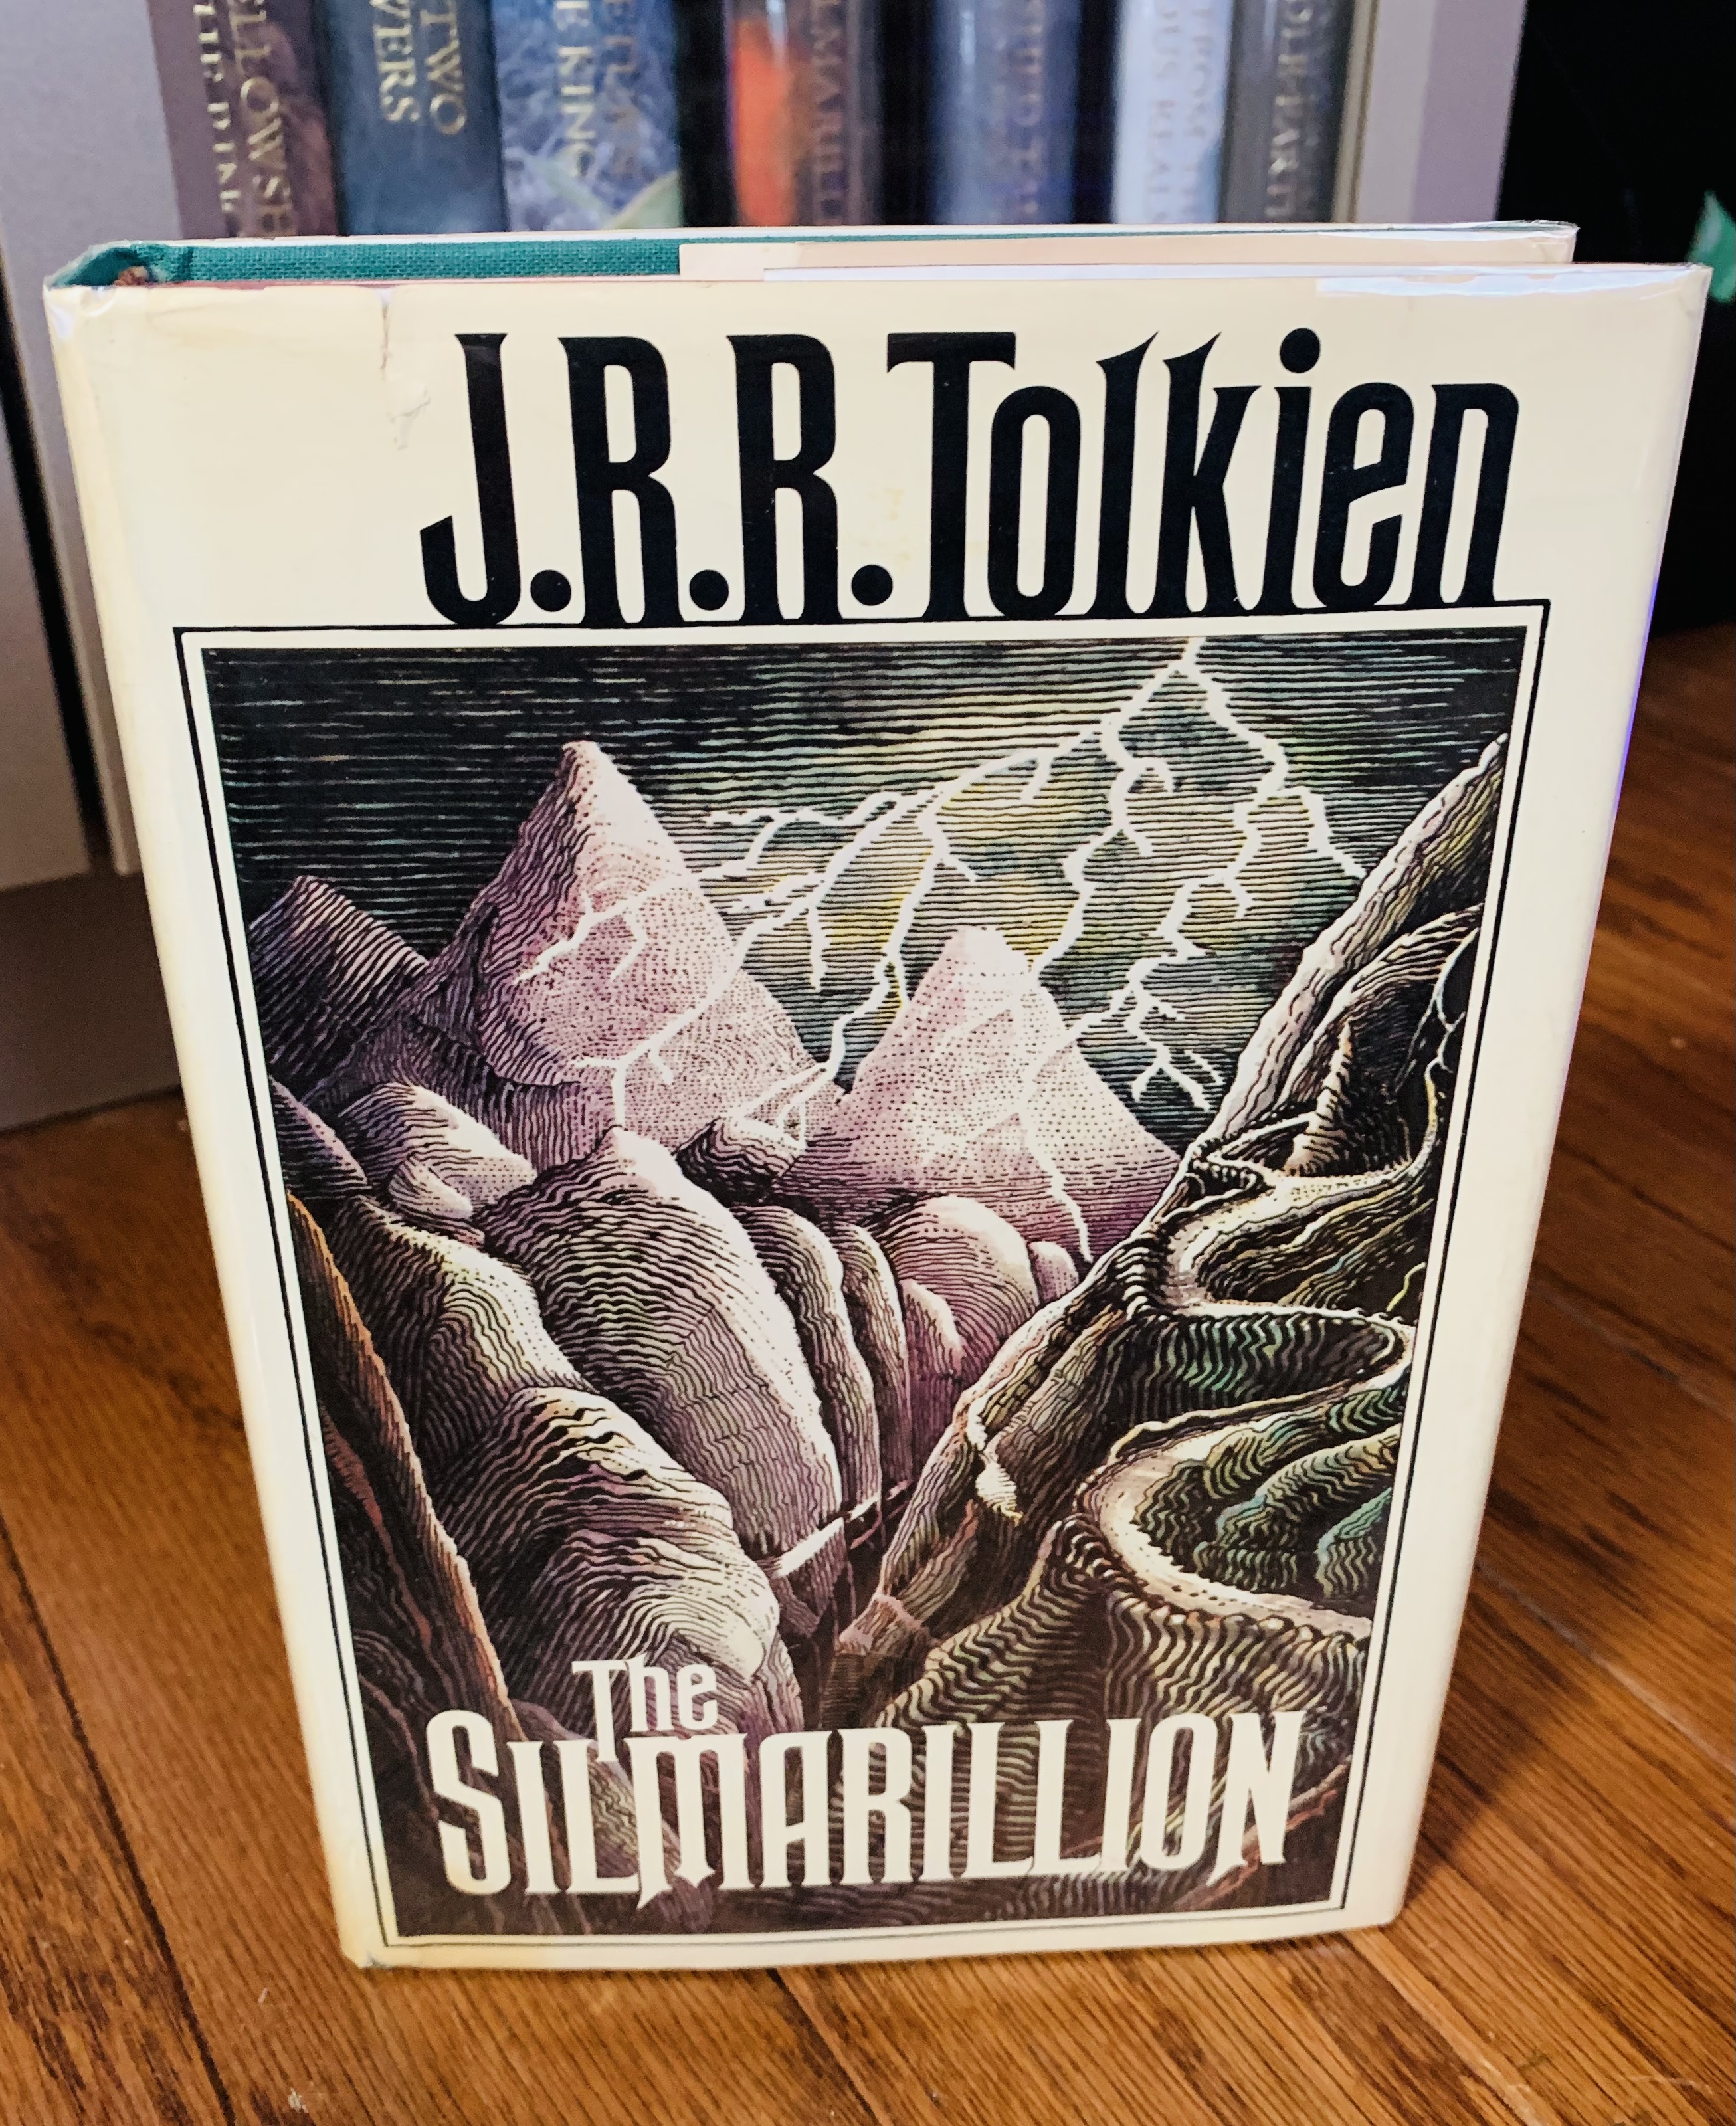 Blind Read Through: J.R.R. Tolkien; The Silmarillion, Of Beleriand and its  Realms, pt. 1